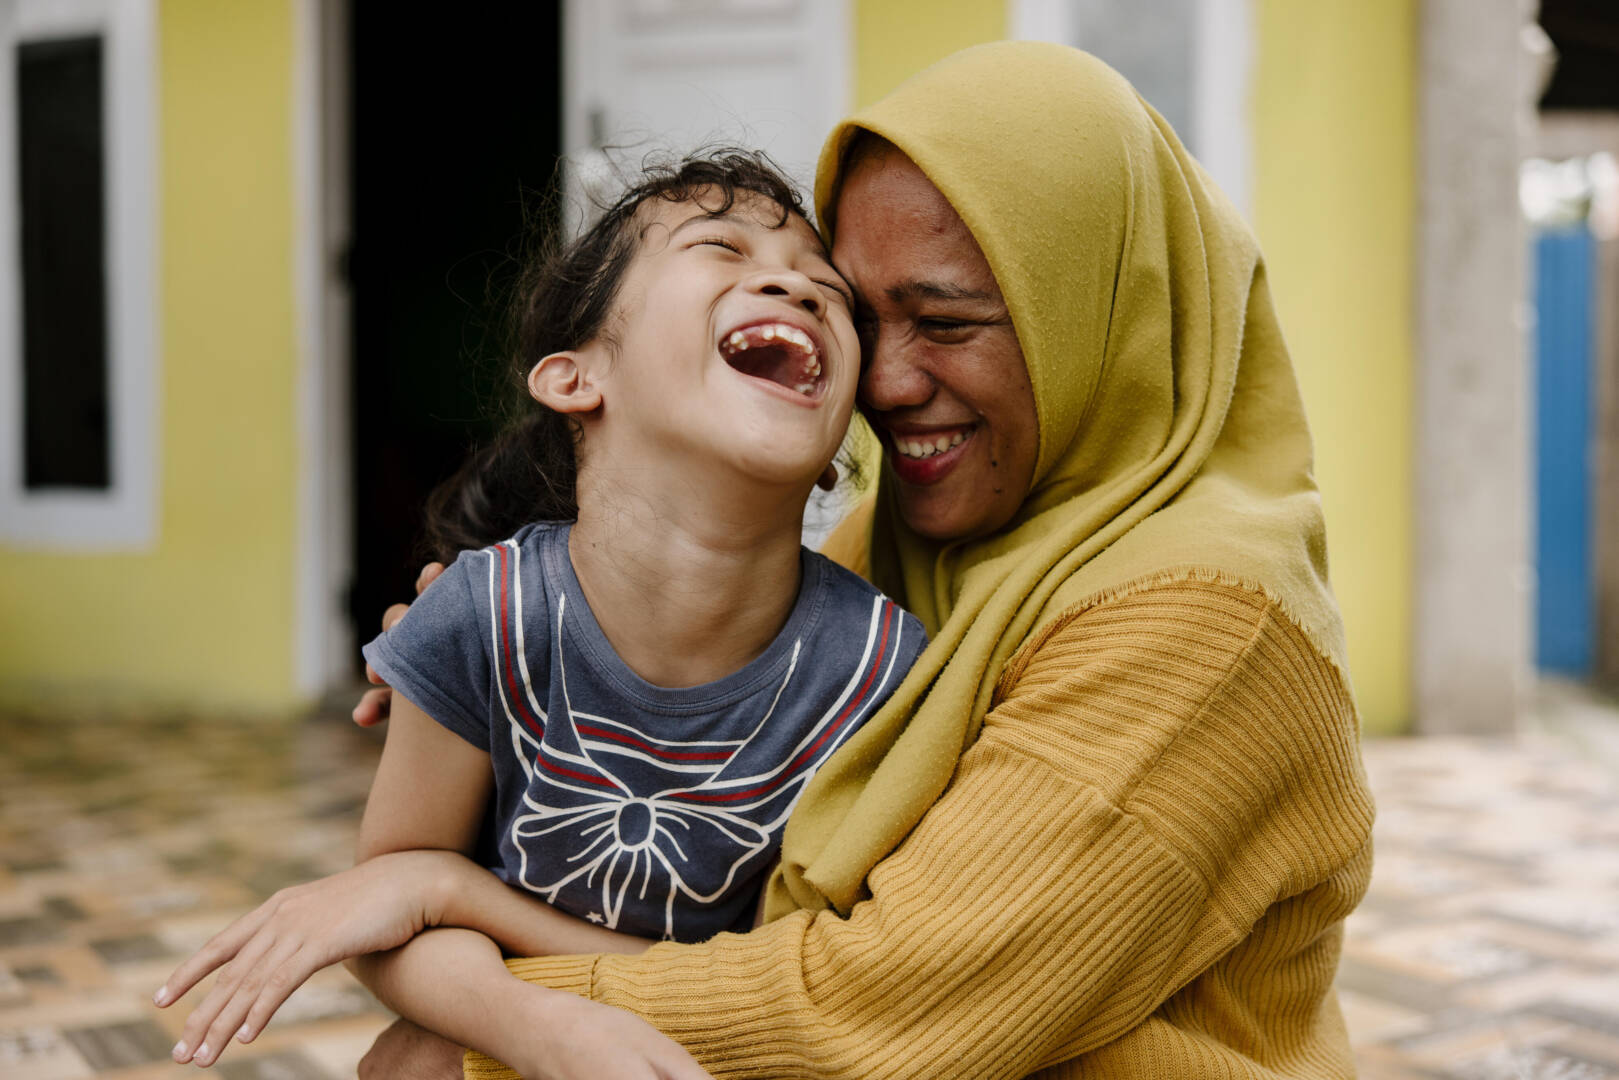 A smiling woman in a headscarf hugs a laughing girl.